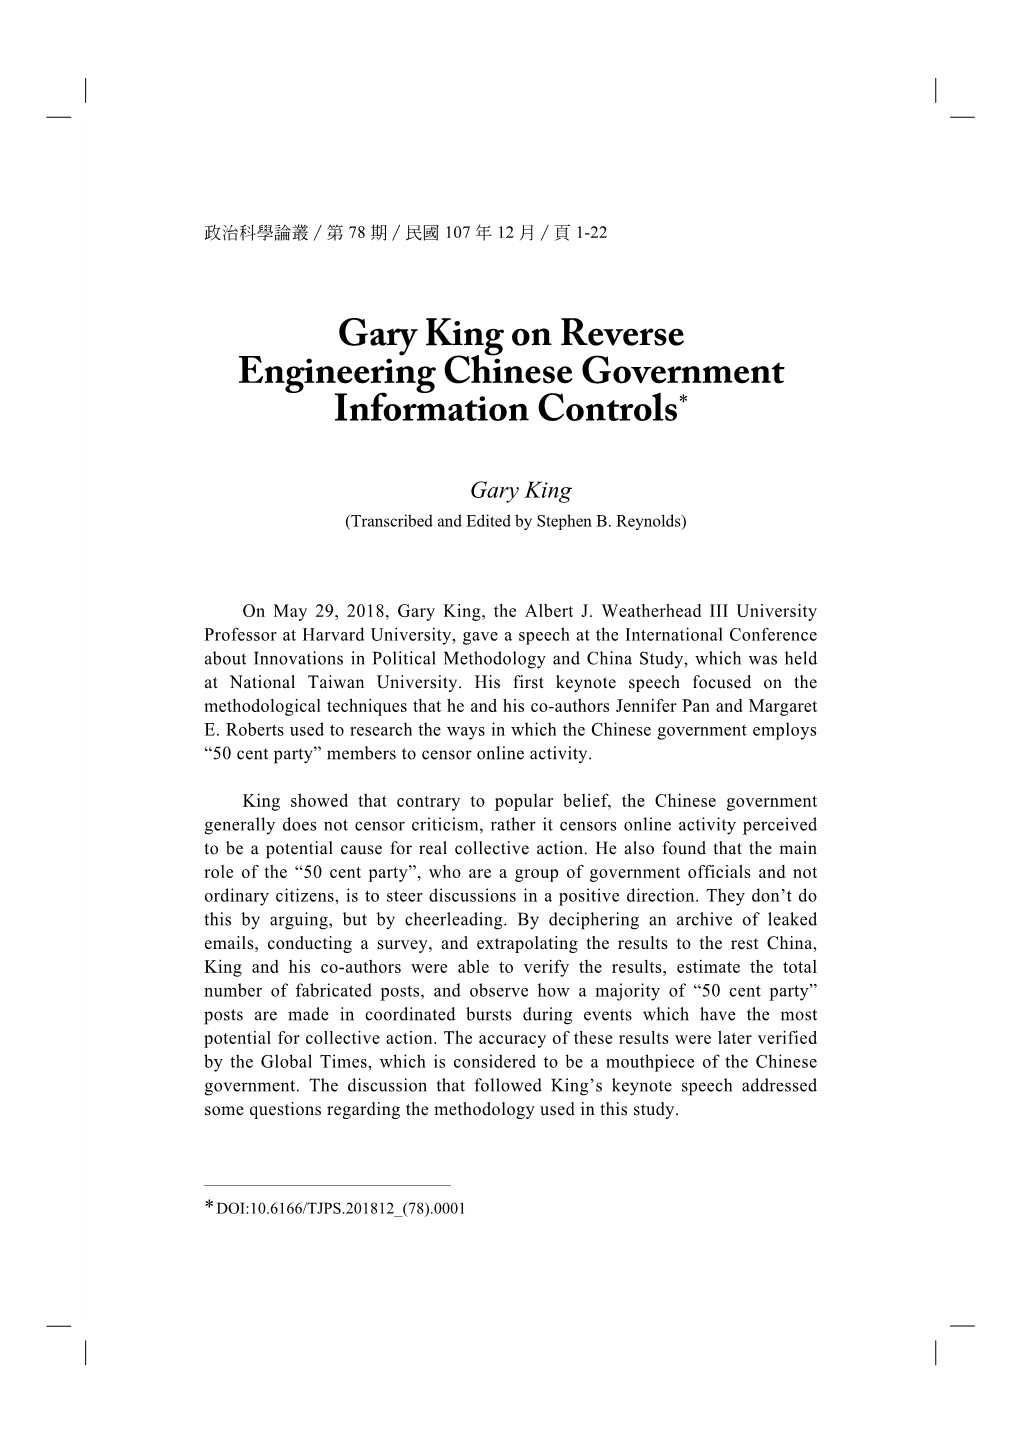 Gary King on Reverse Engineering Chinese Government Information Controls*